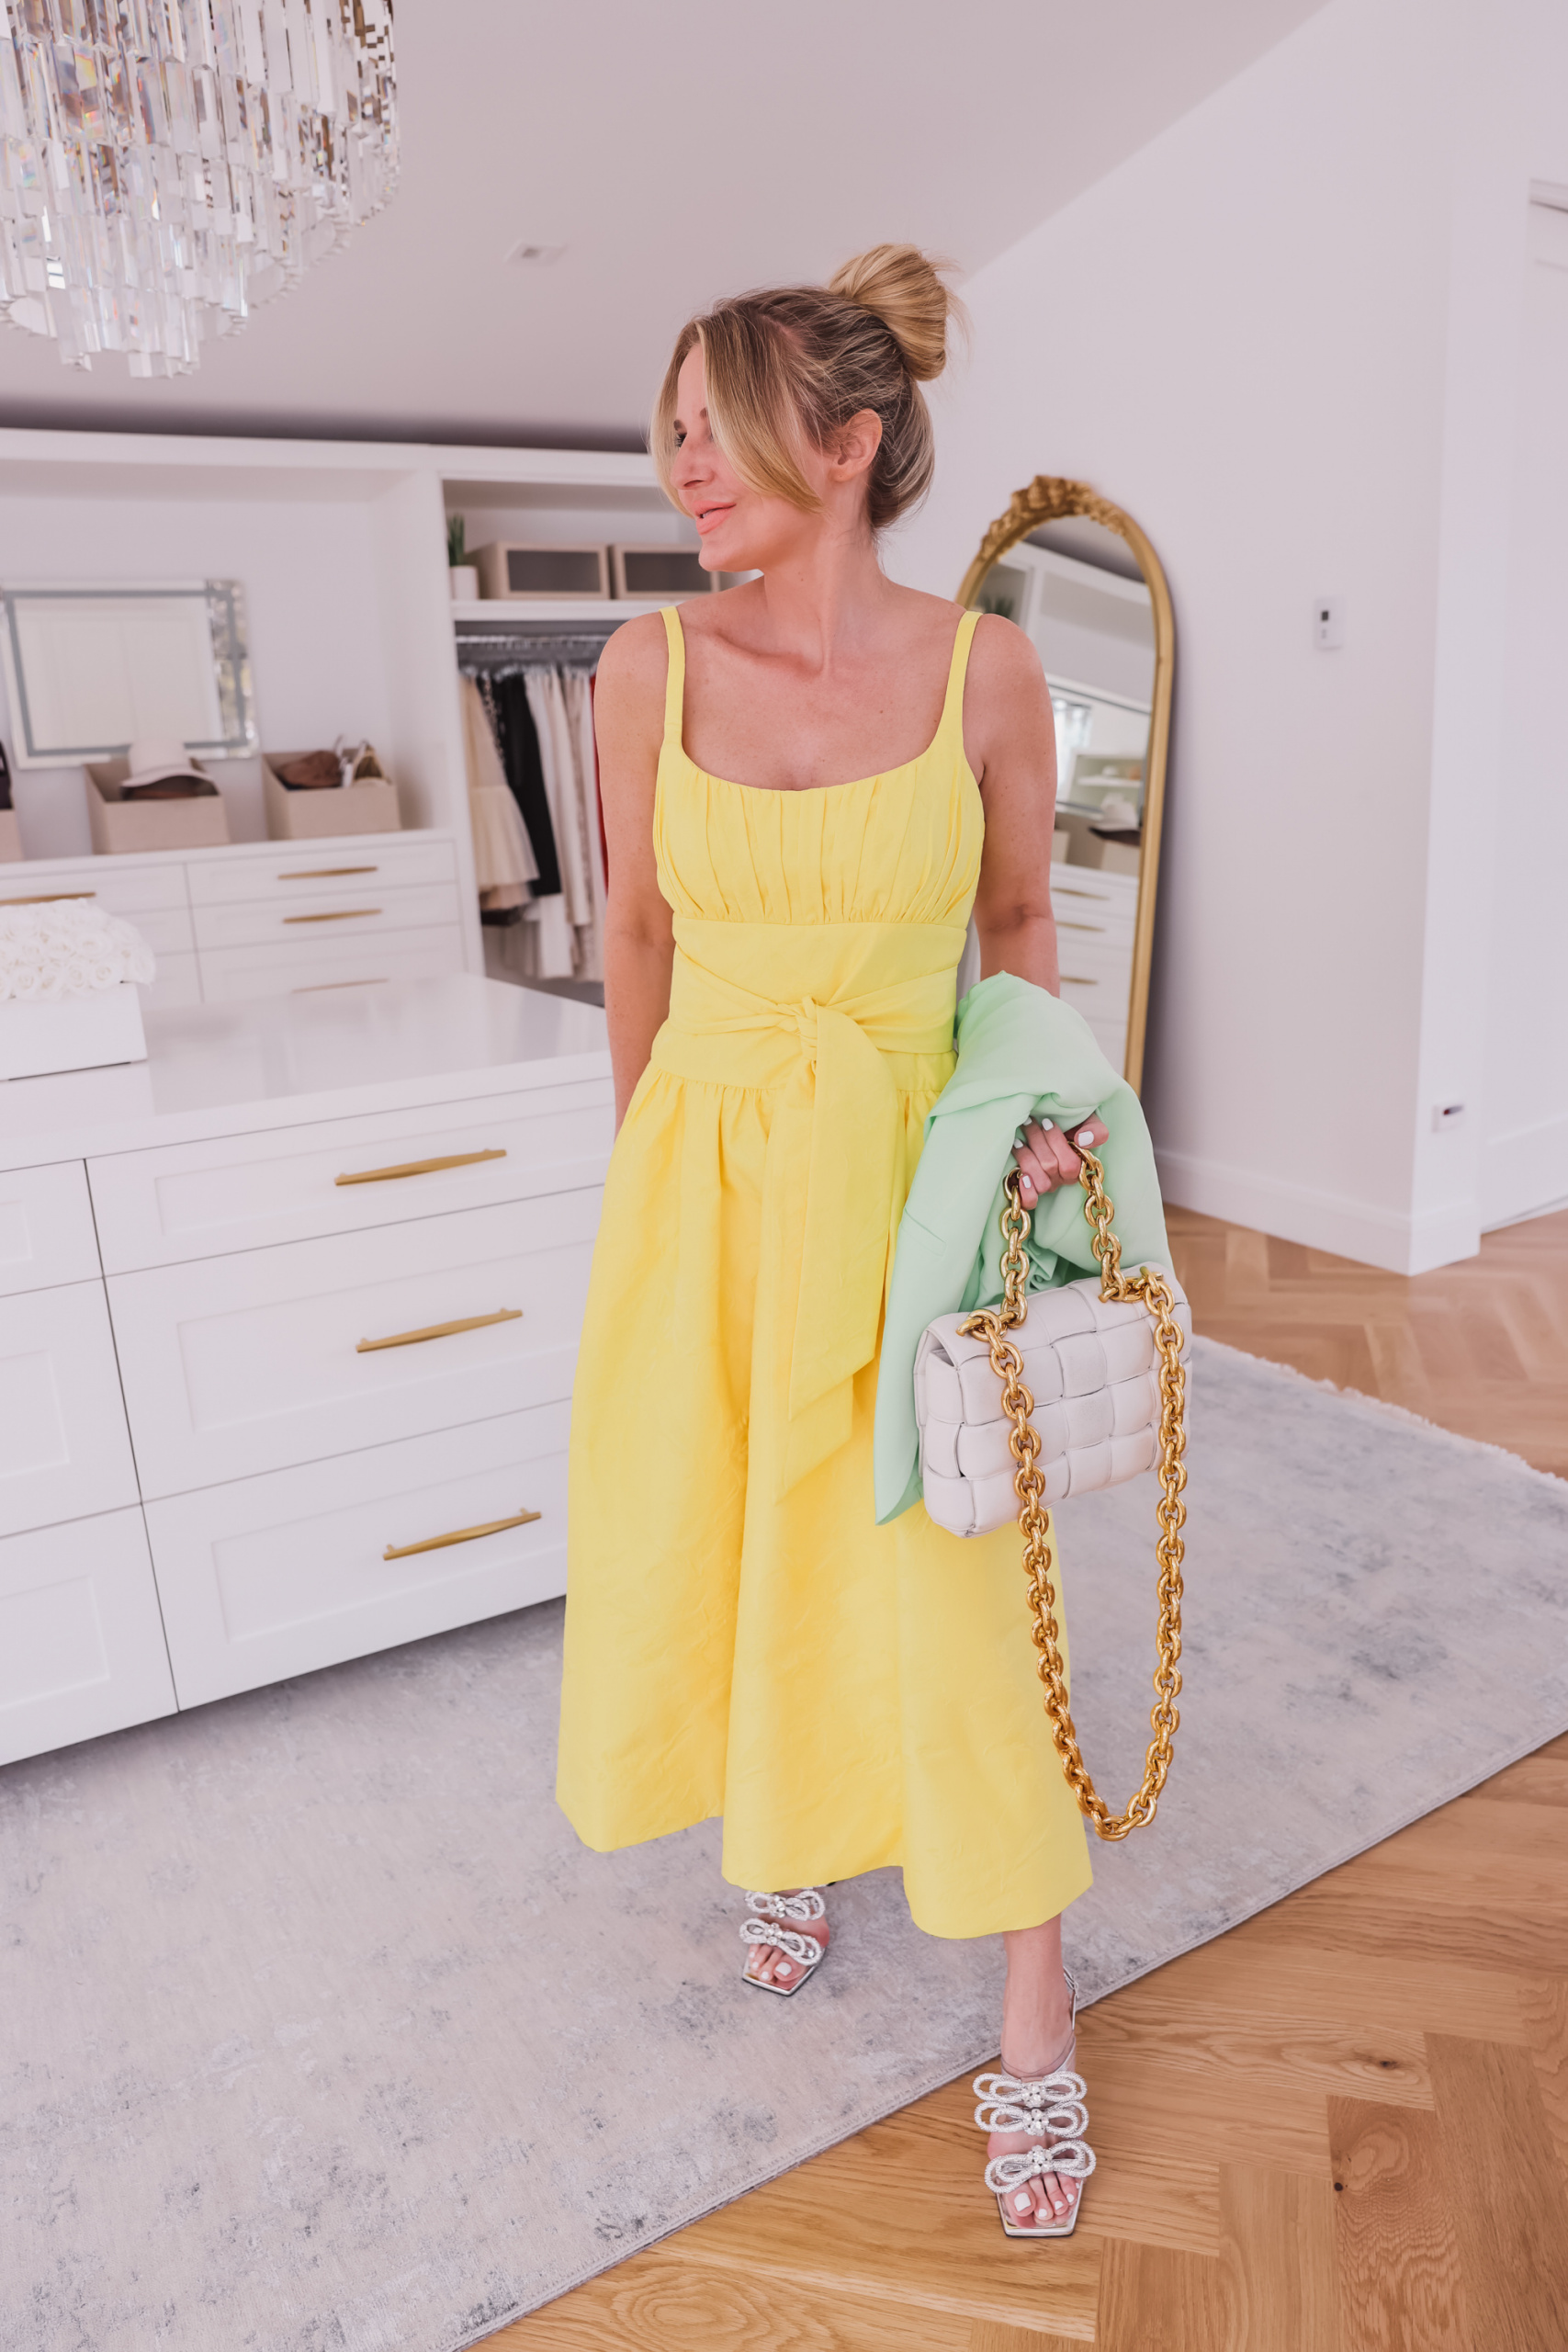 Yellow A-Line Dress | How To Look Slimmer in a Dress